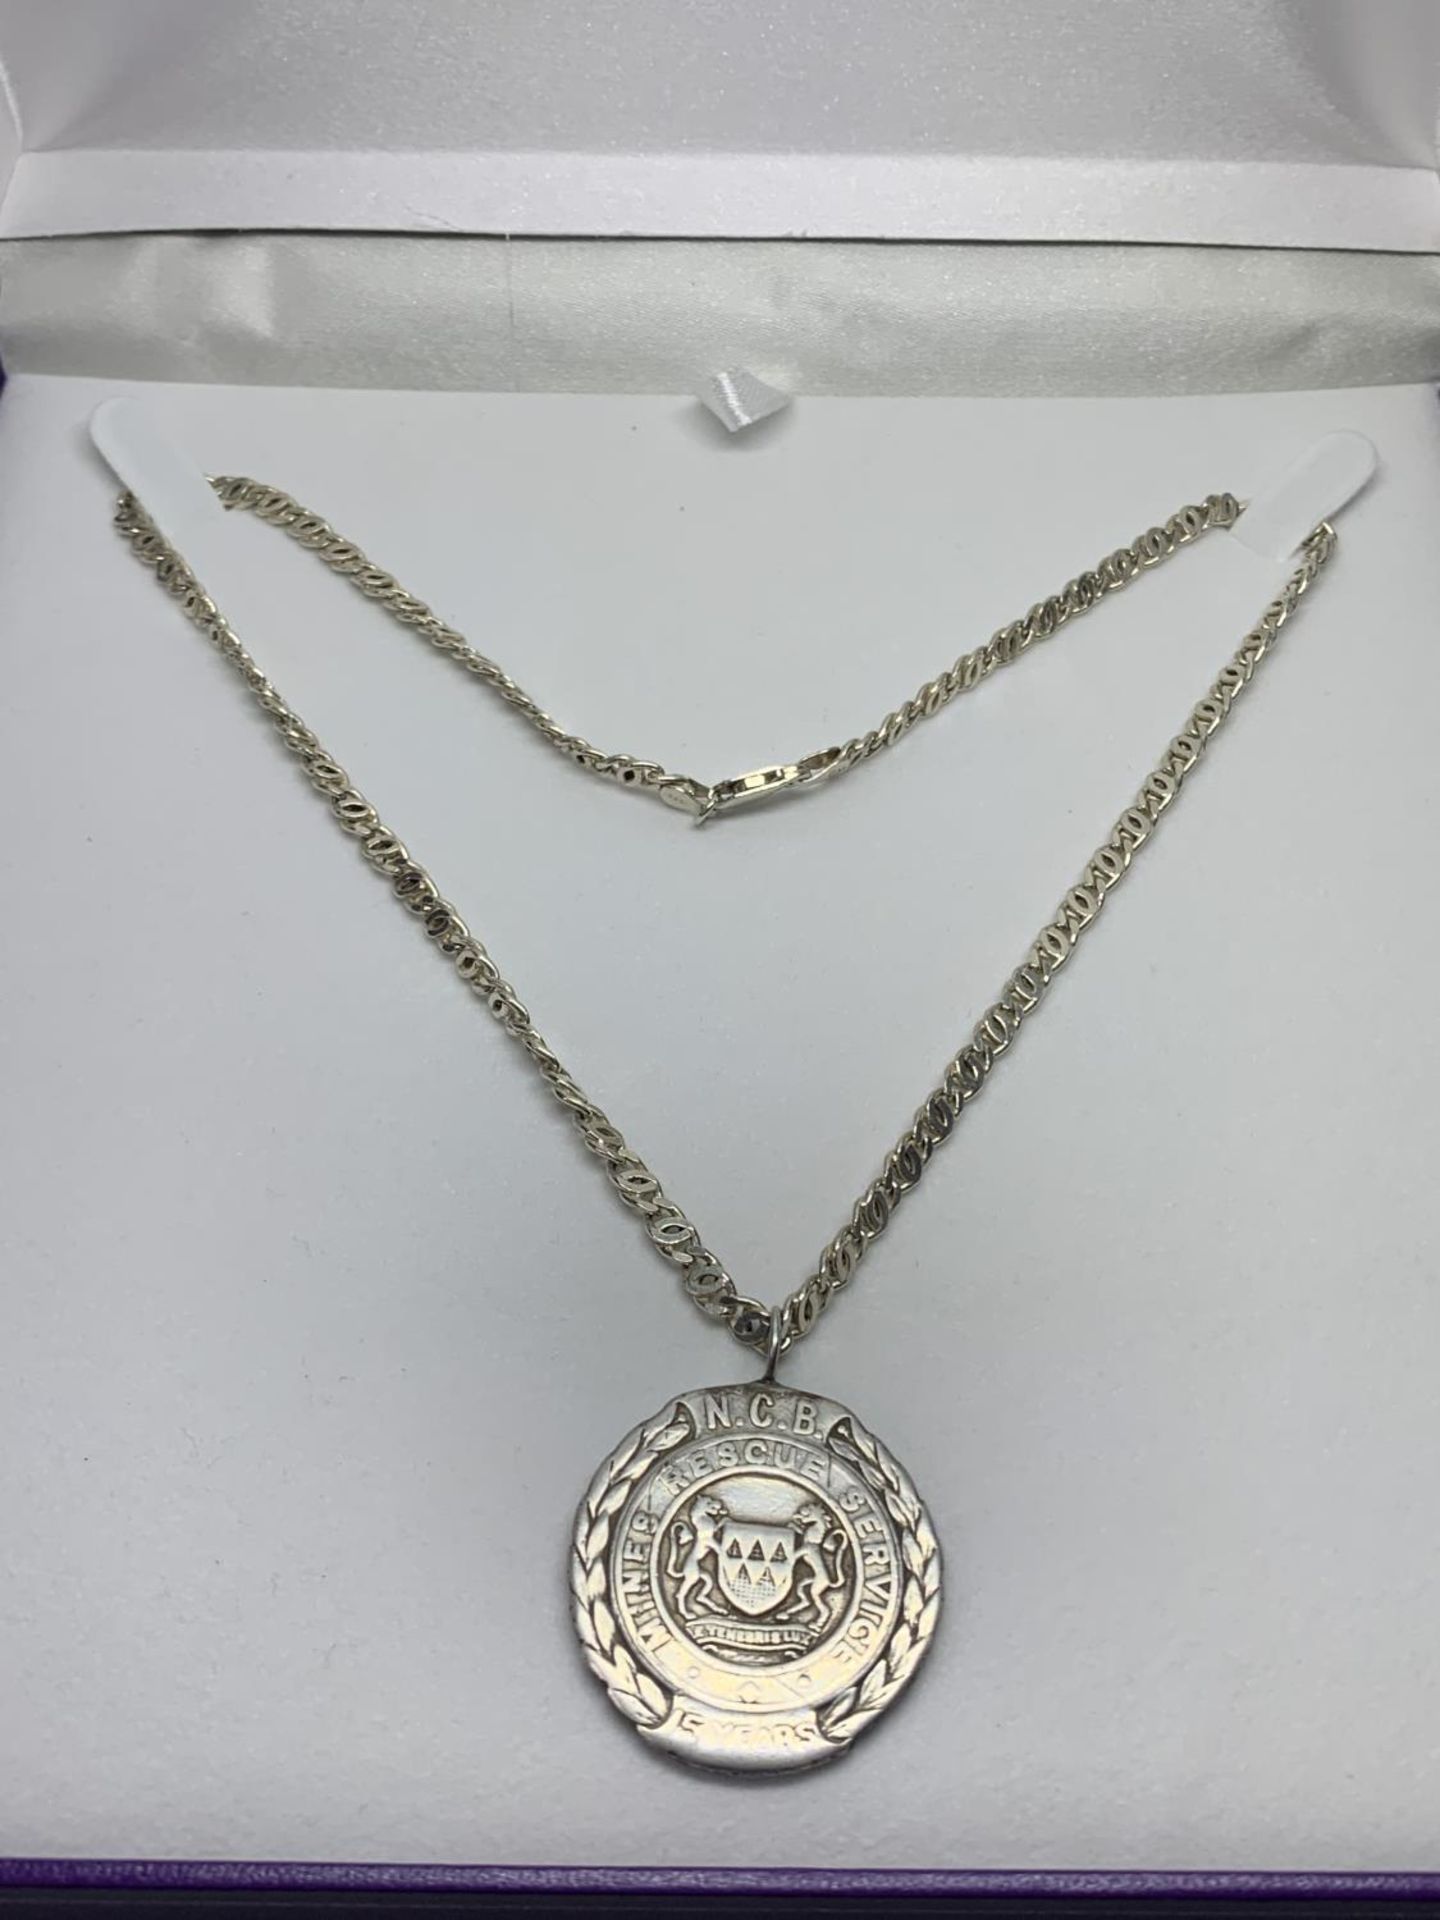 A SILVER NECKLACE WITH A HALLMARKED BIRMINGHAM SILVER MINERS MEDAL IN A PRESENTATION BOX